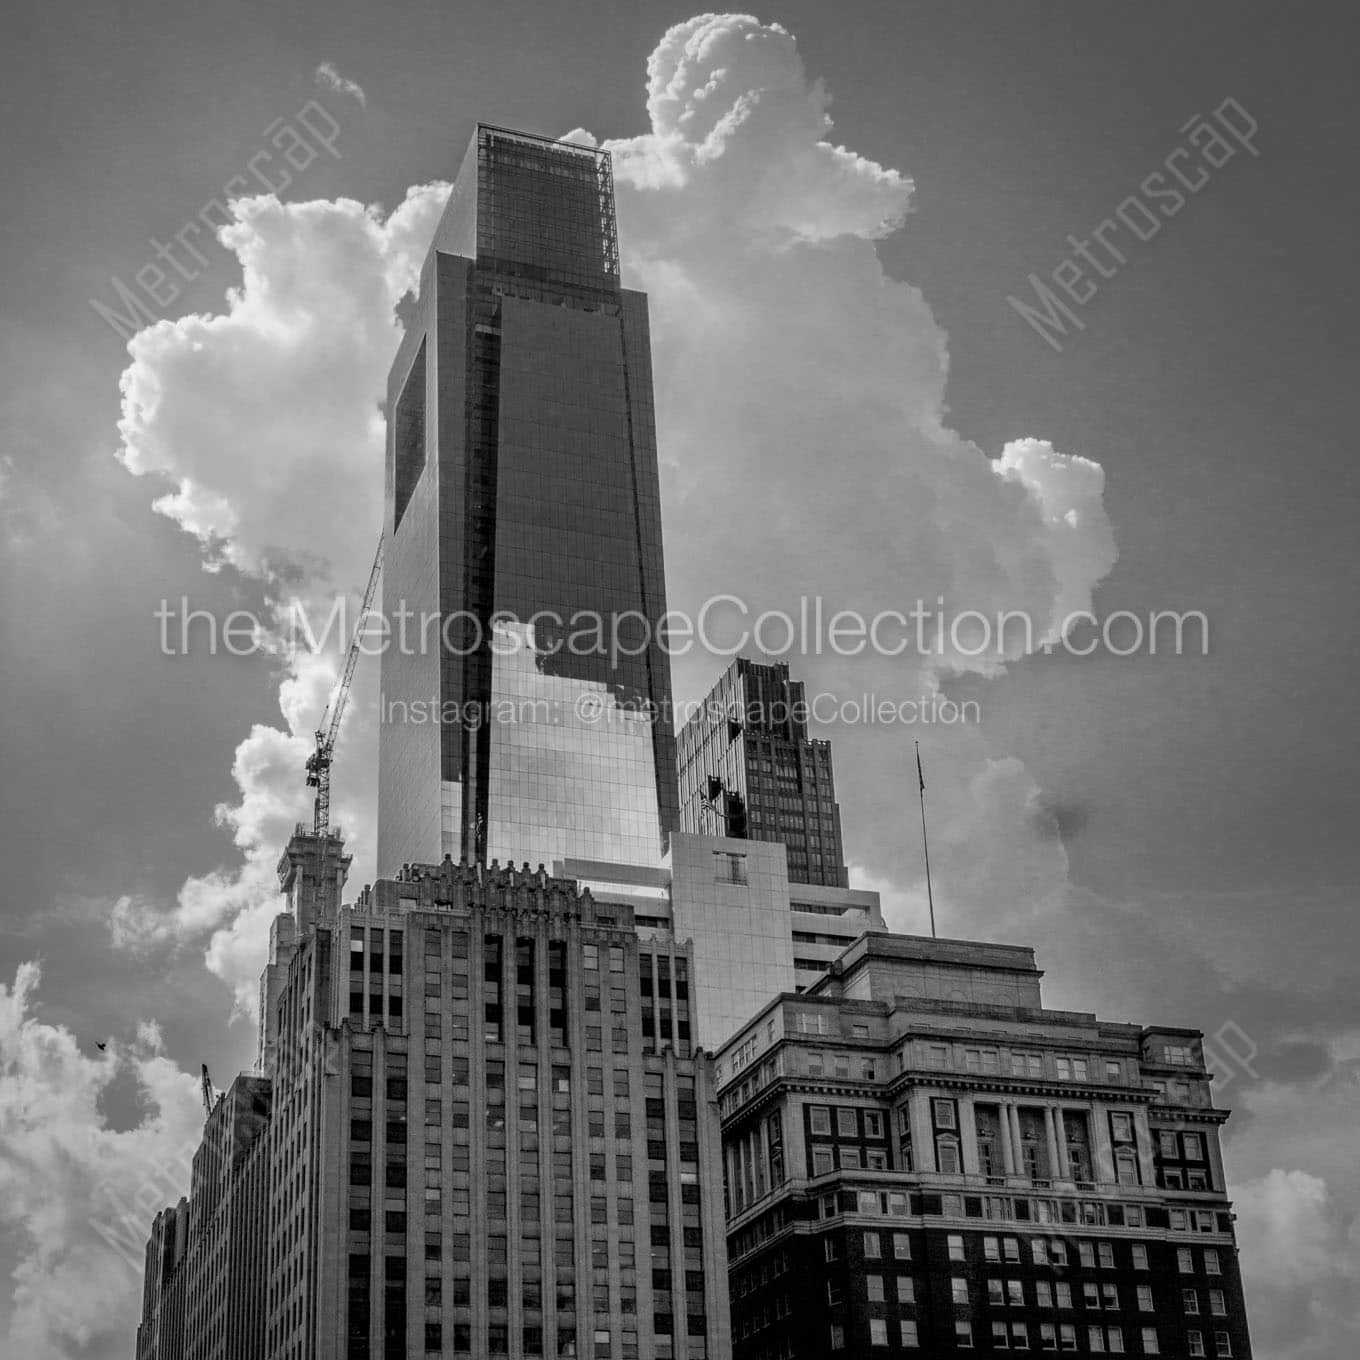 thunder cloud over comcast tower downtown philly Black & White Office Art